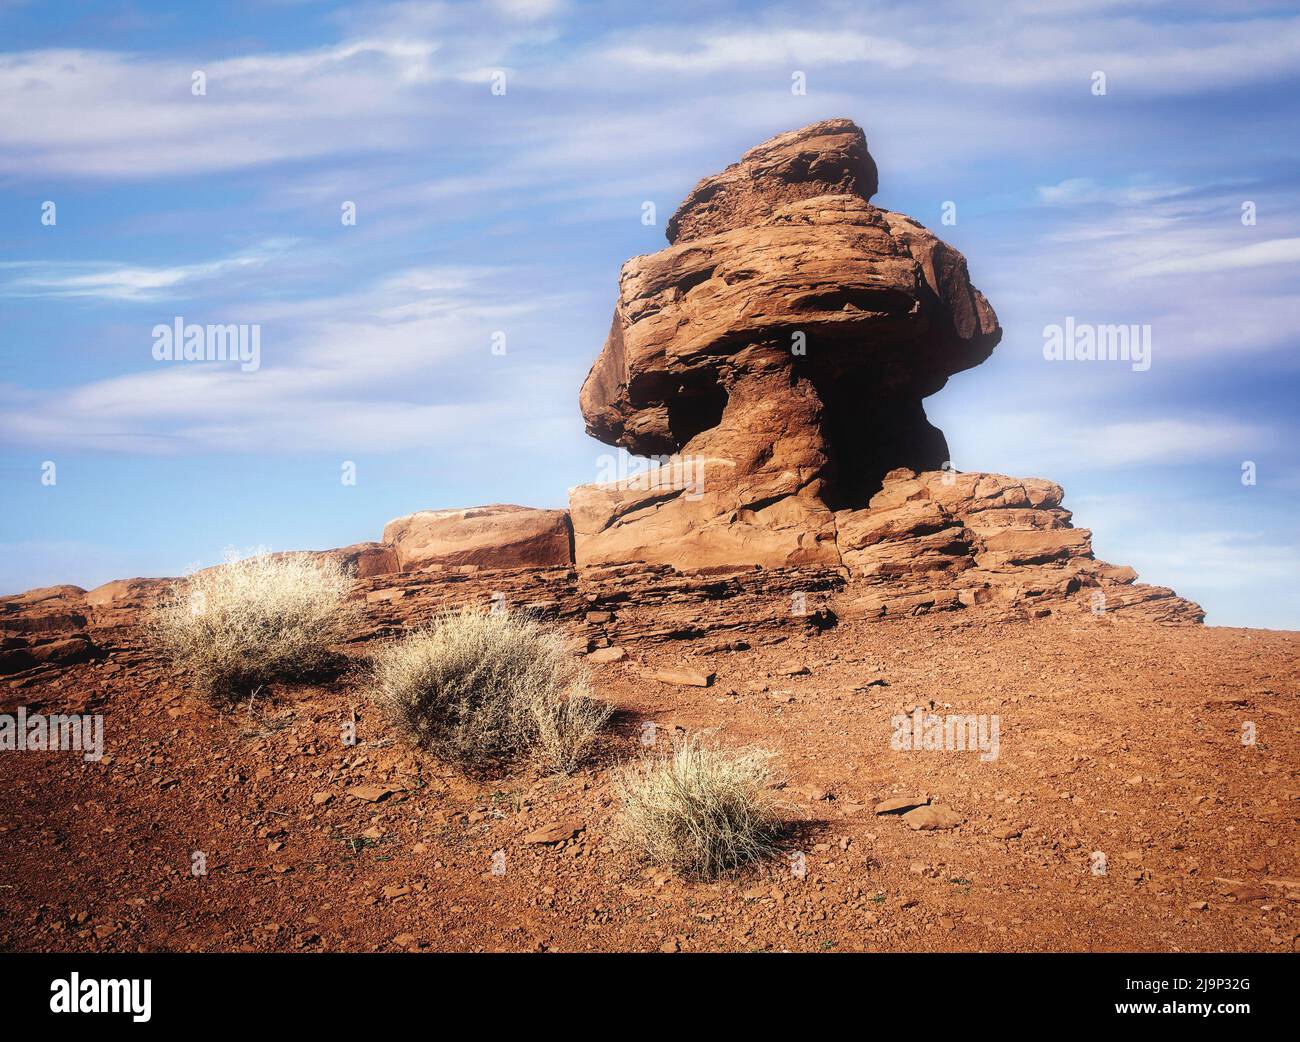 One of the many rock formations that rise above the landscape in Monument Valley, Arizona. Stock Photo